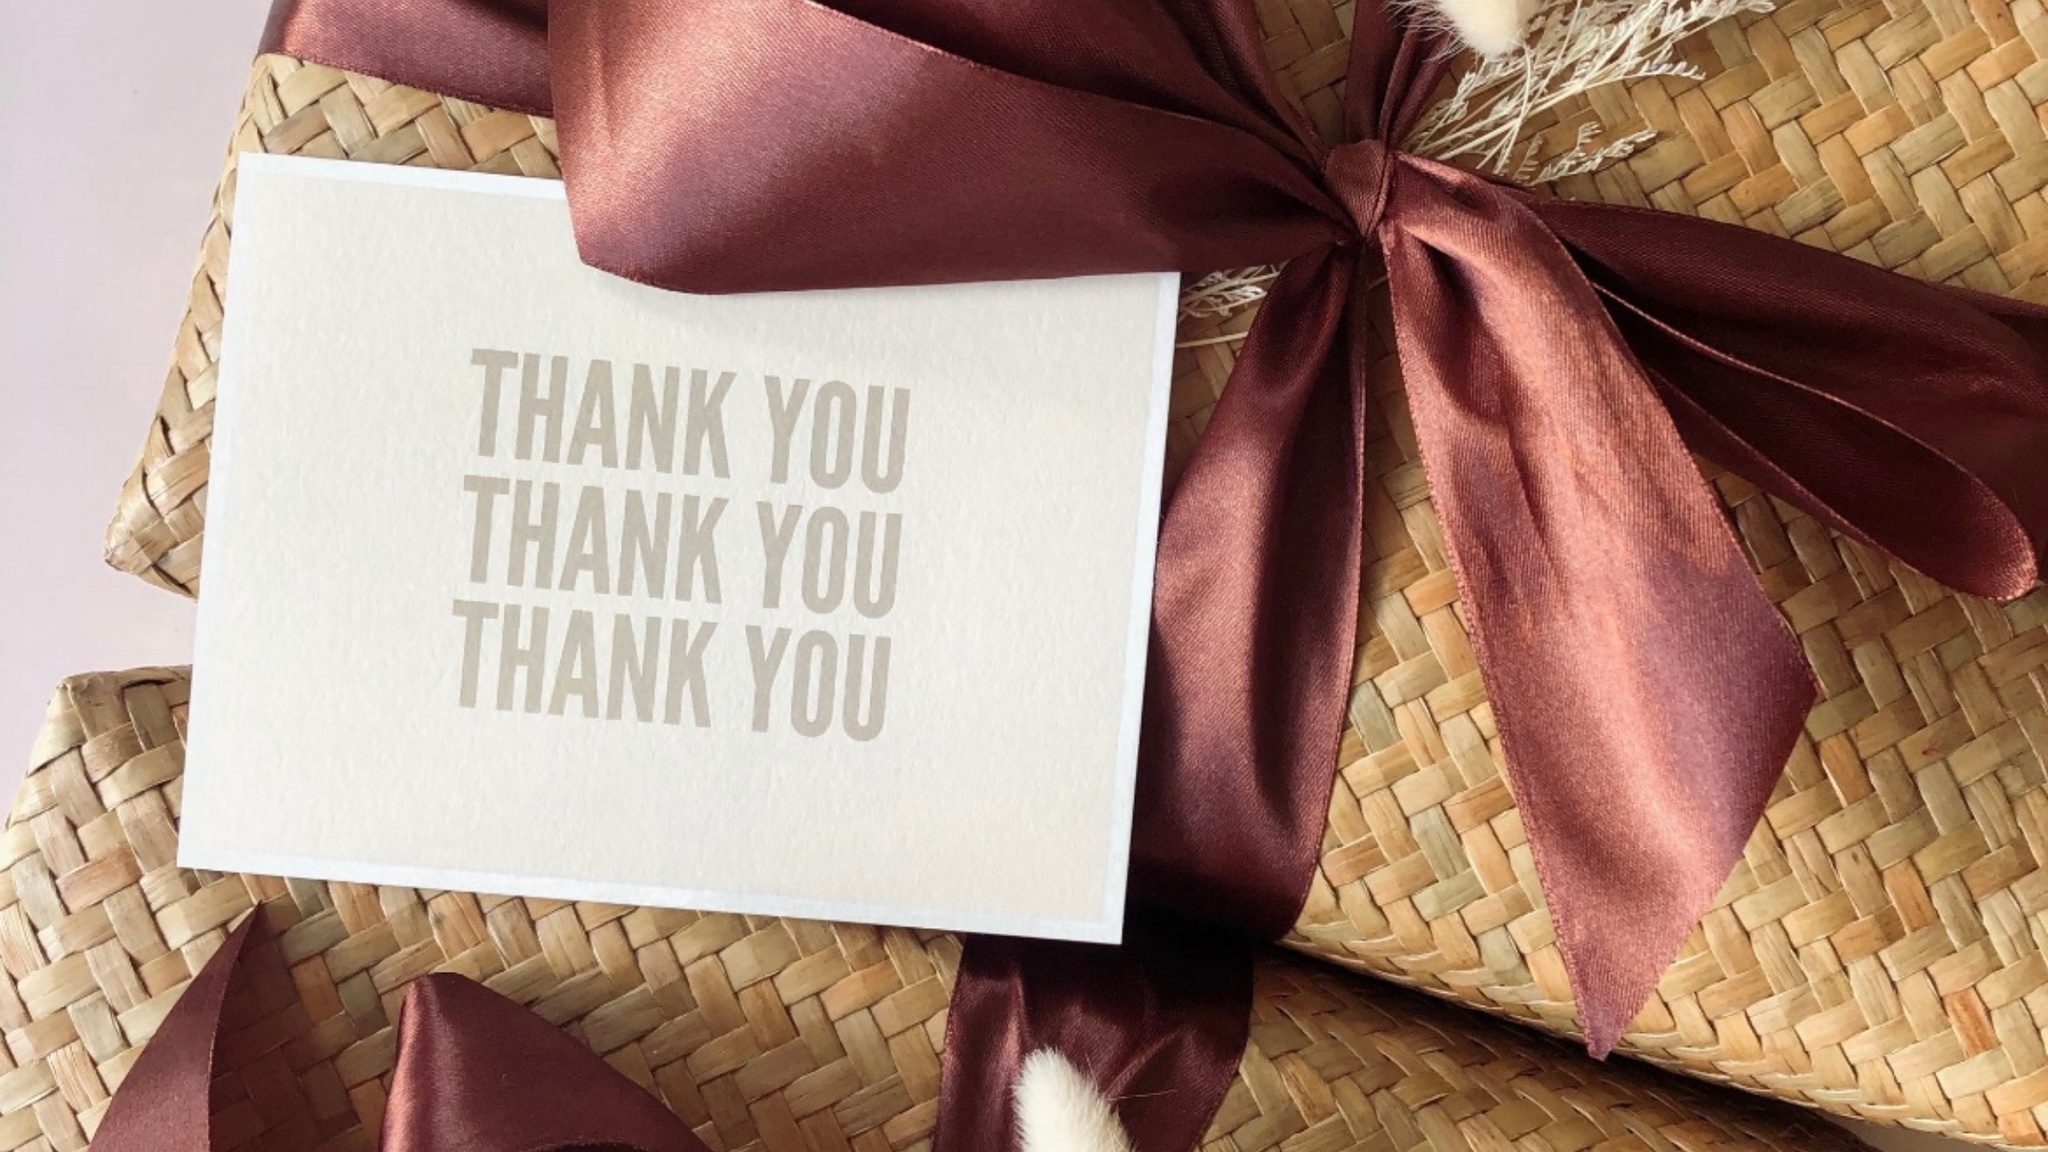 5 Reasons To Give End-Of-Year Client Gifts